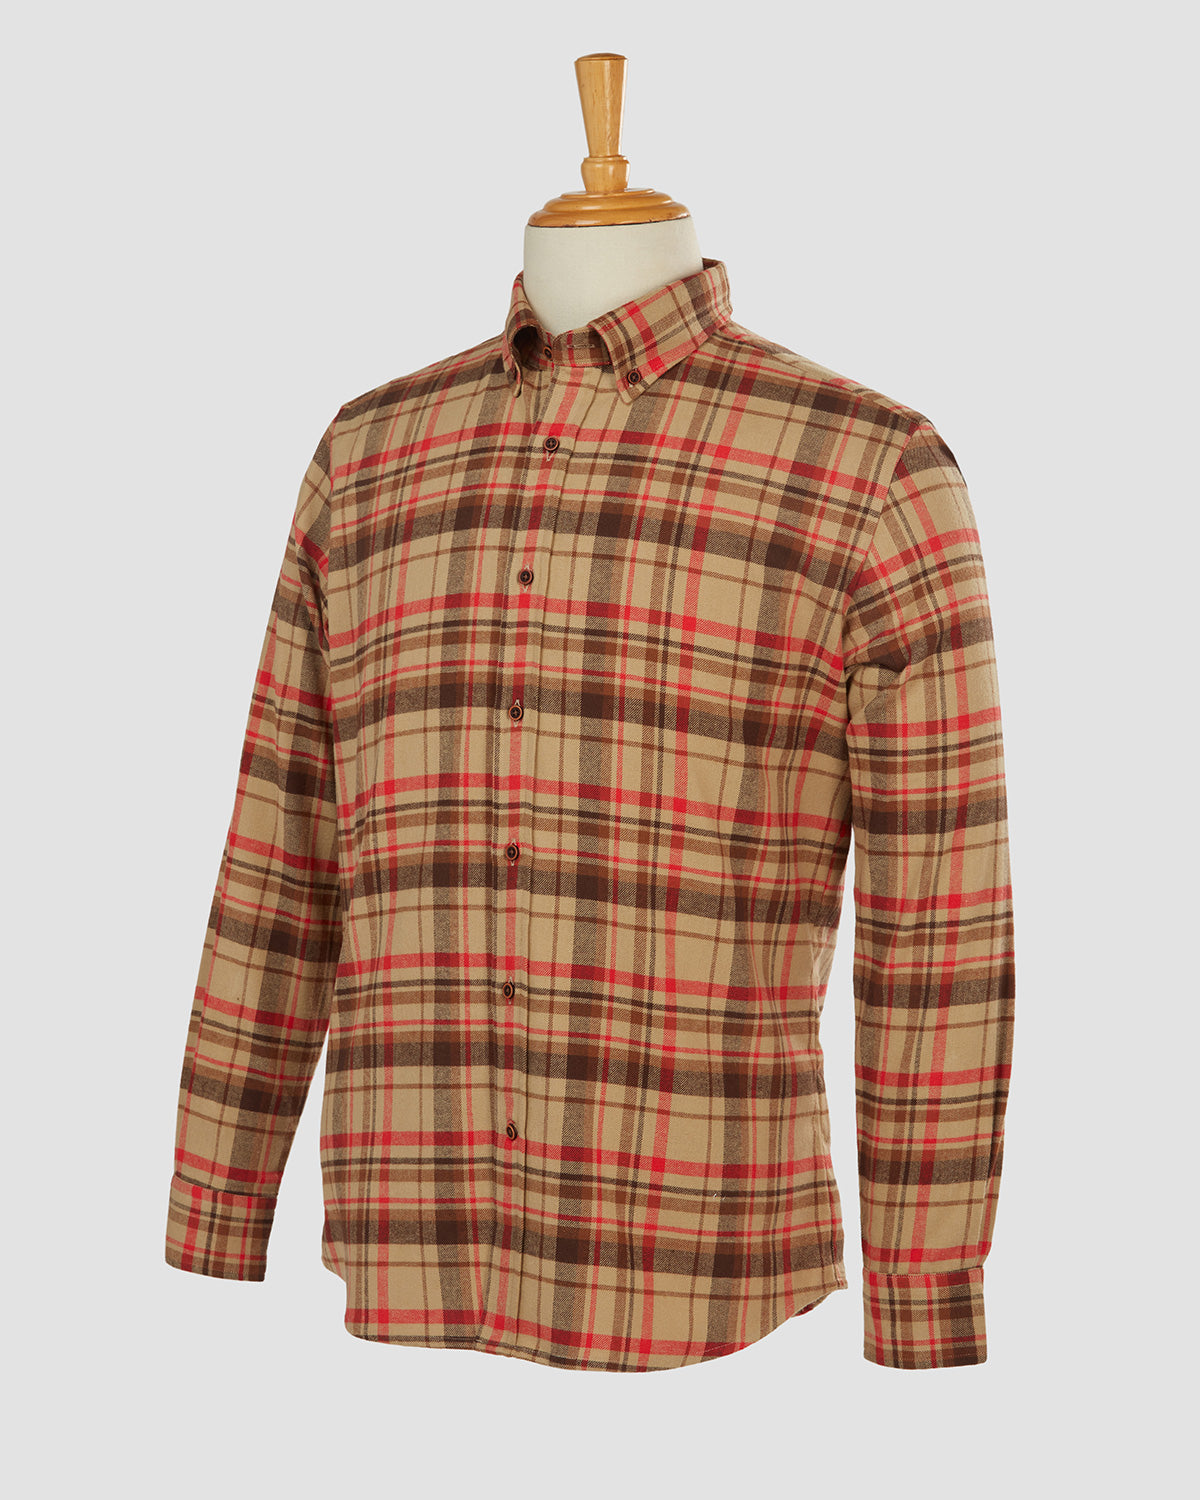 Japanese Sandy Fawn Checked Shirt